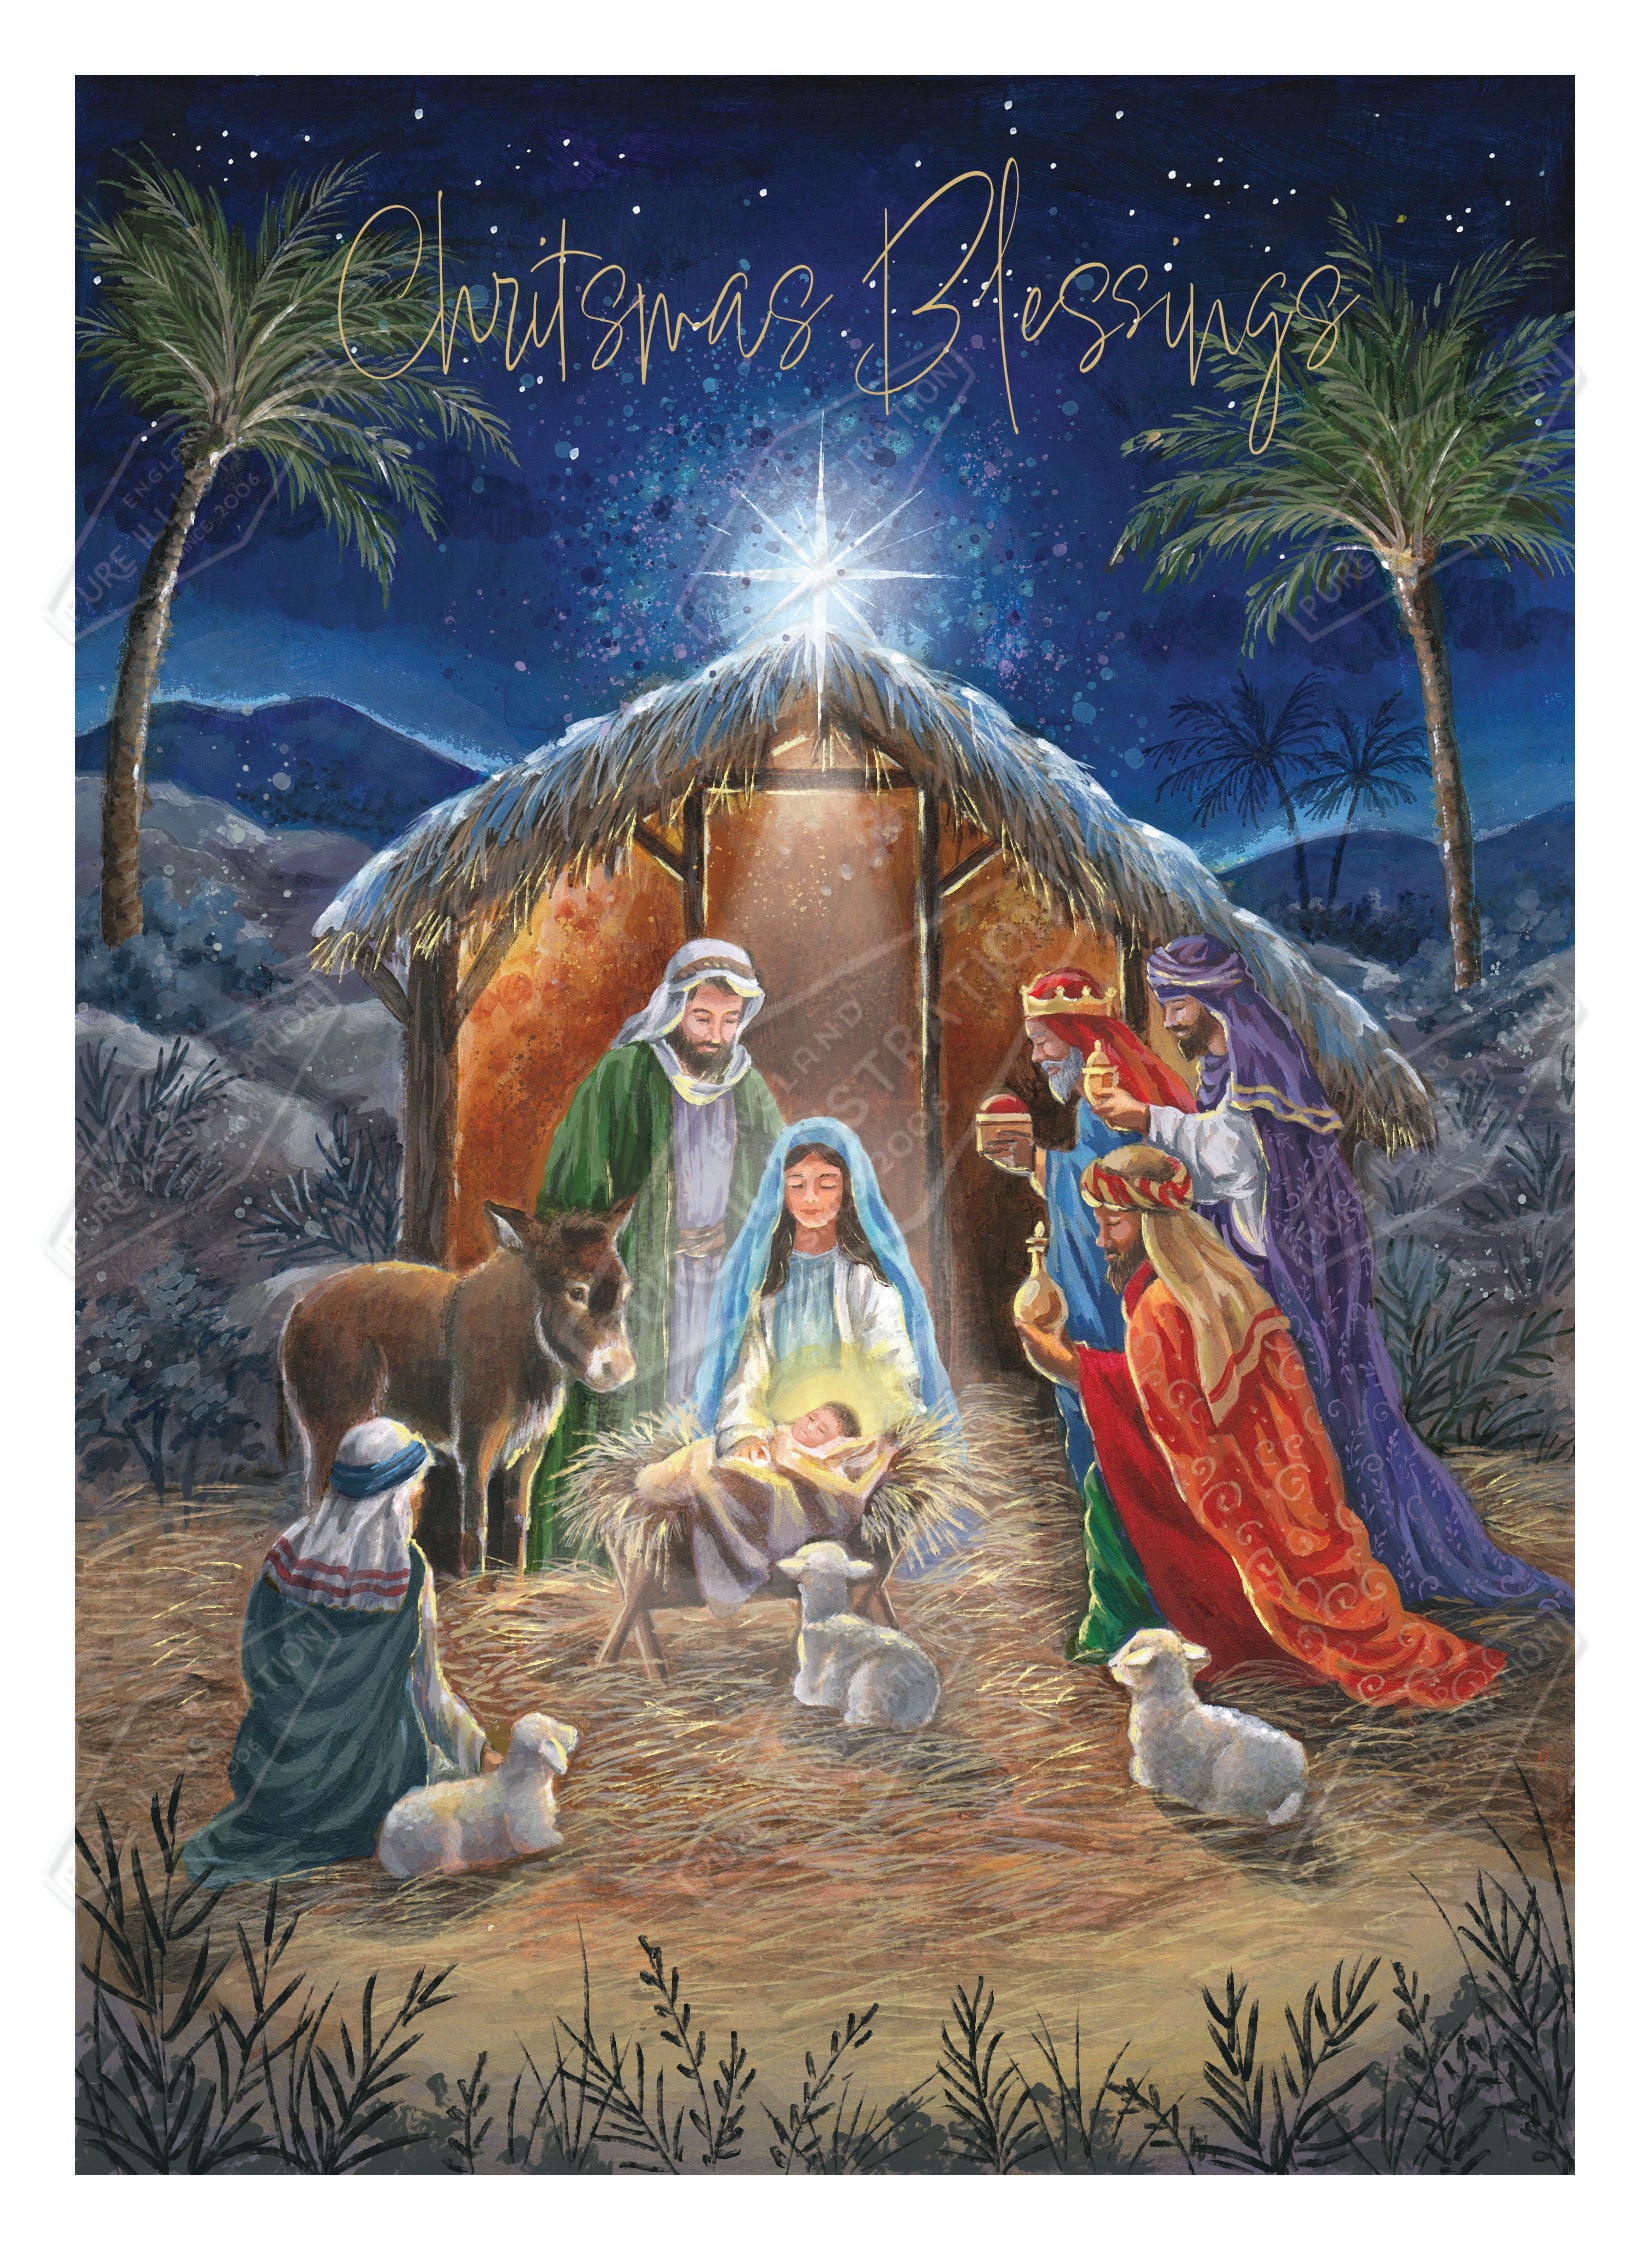 00035981AMA - Ally Marie is represented by Pure Art Licensing Agency - Christmas Greeting Card Design